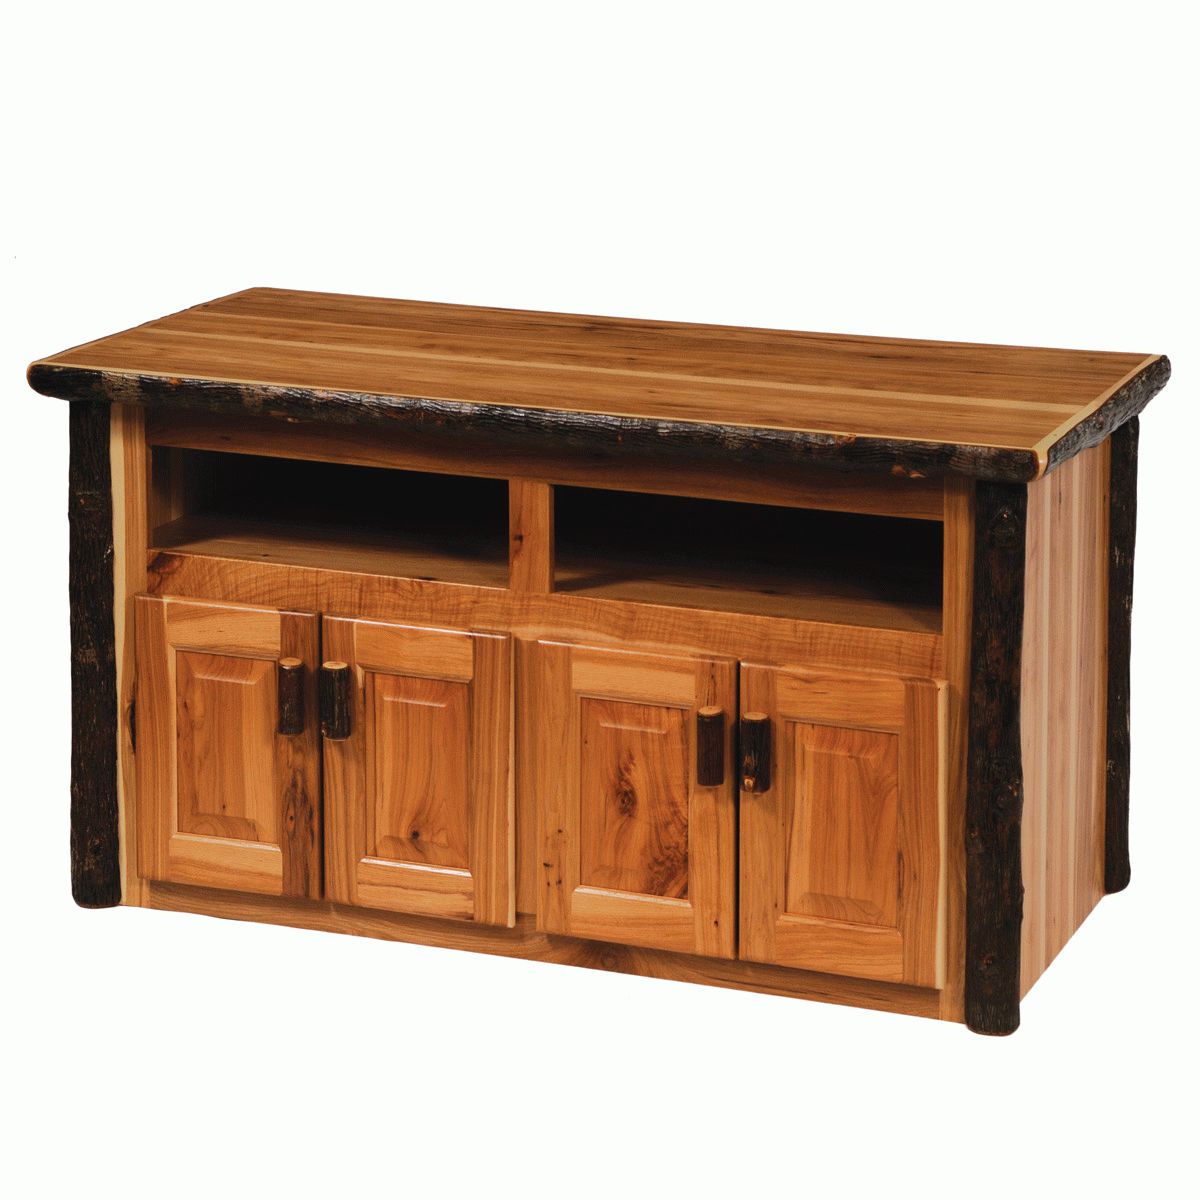 Rustic Tv Stands: Hickory Widescreen Tv Stand Intended For Anya Wide Tv Stands (Gallery 14 of 20)